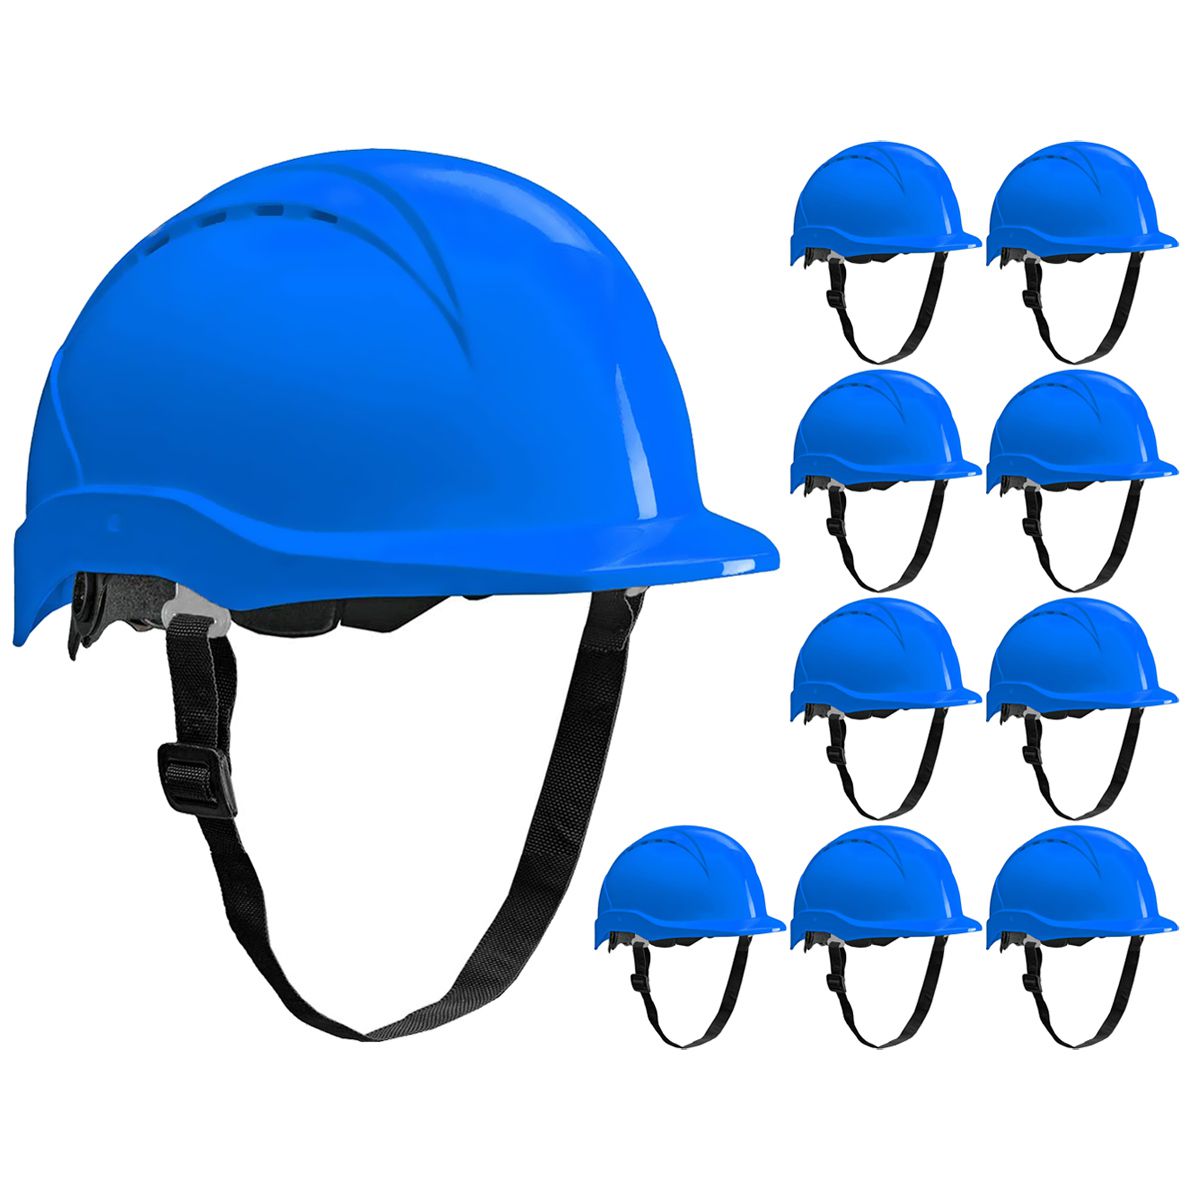 10 ACE Patera construction helmets - Robust safety helmets for construction & industry - EN 397 - with adjustable ventilation - Blue